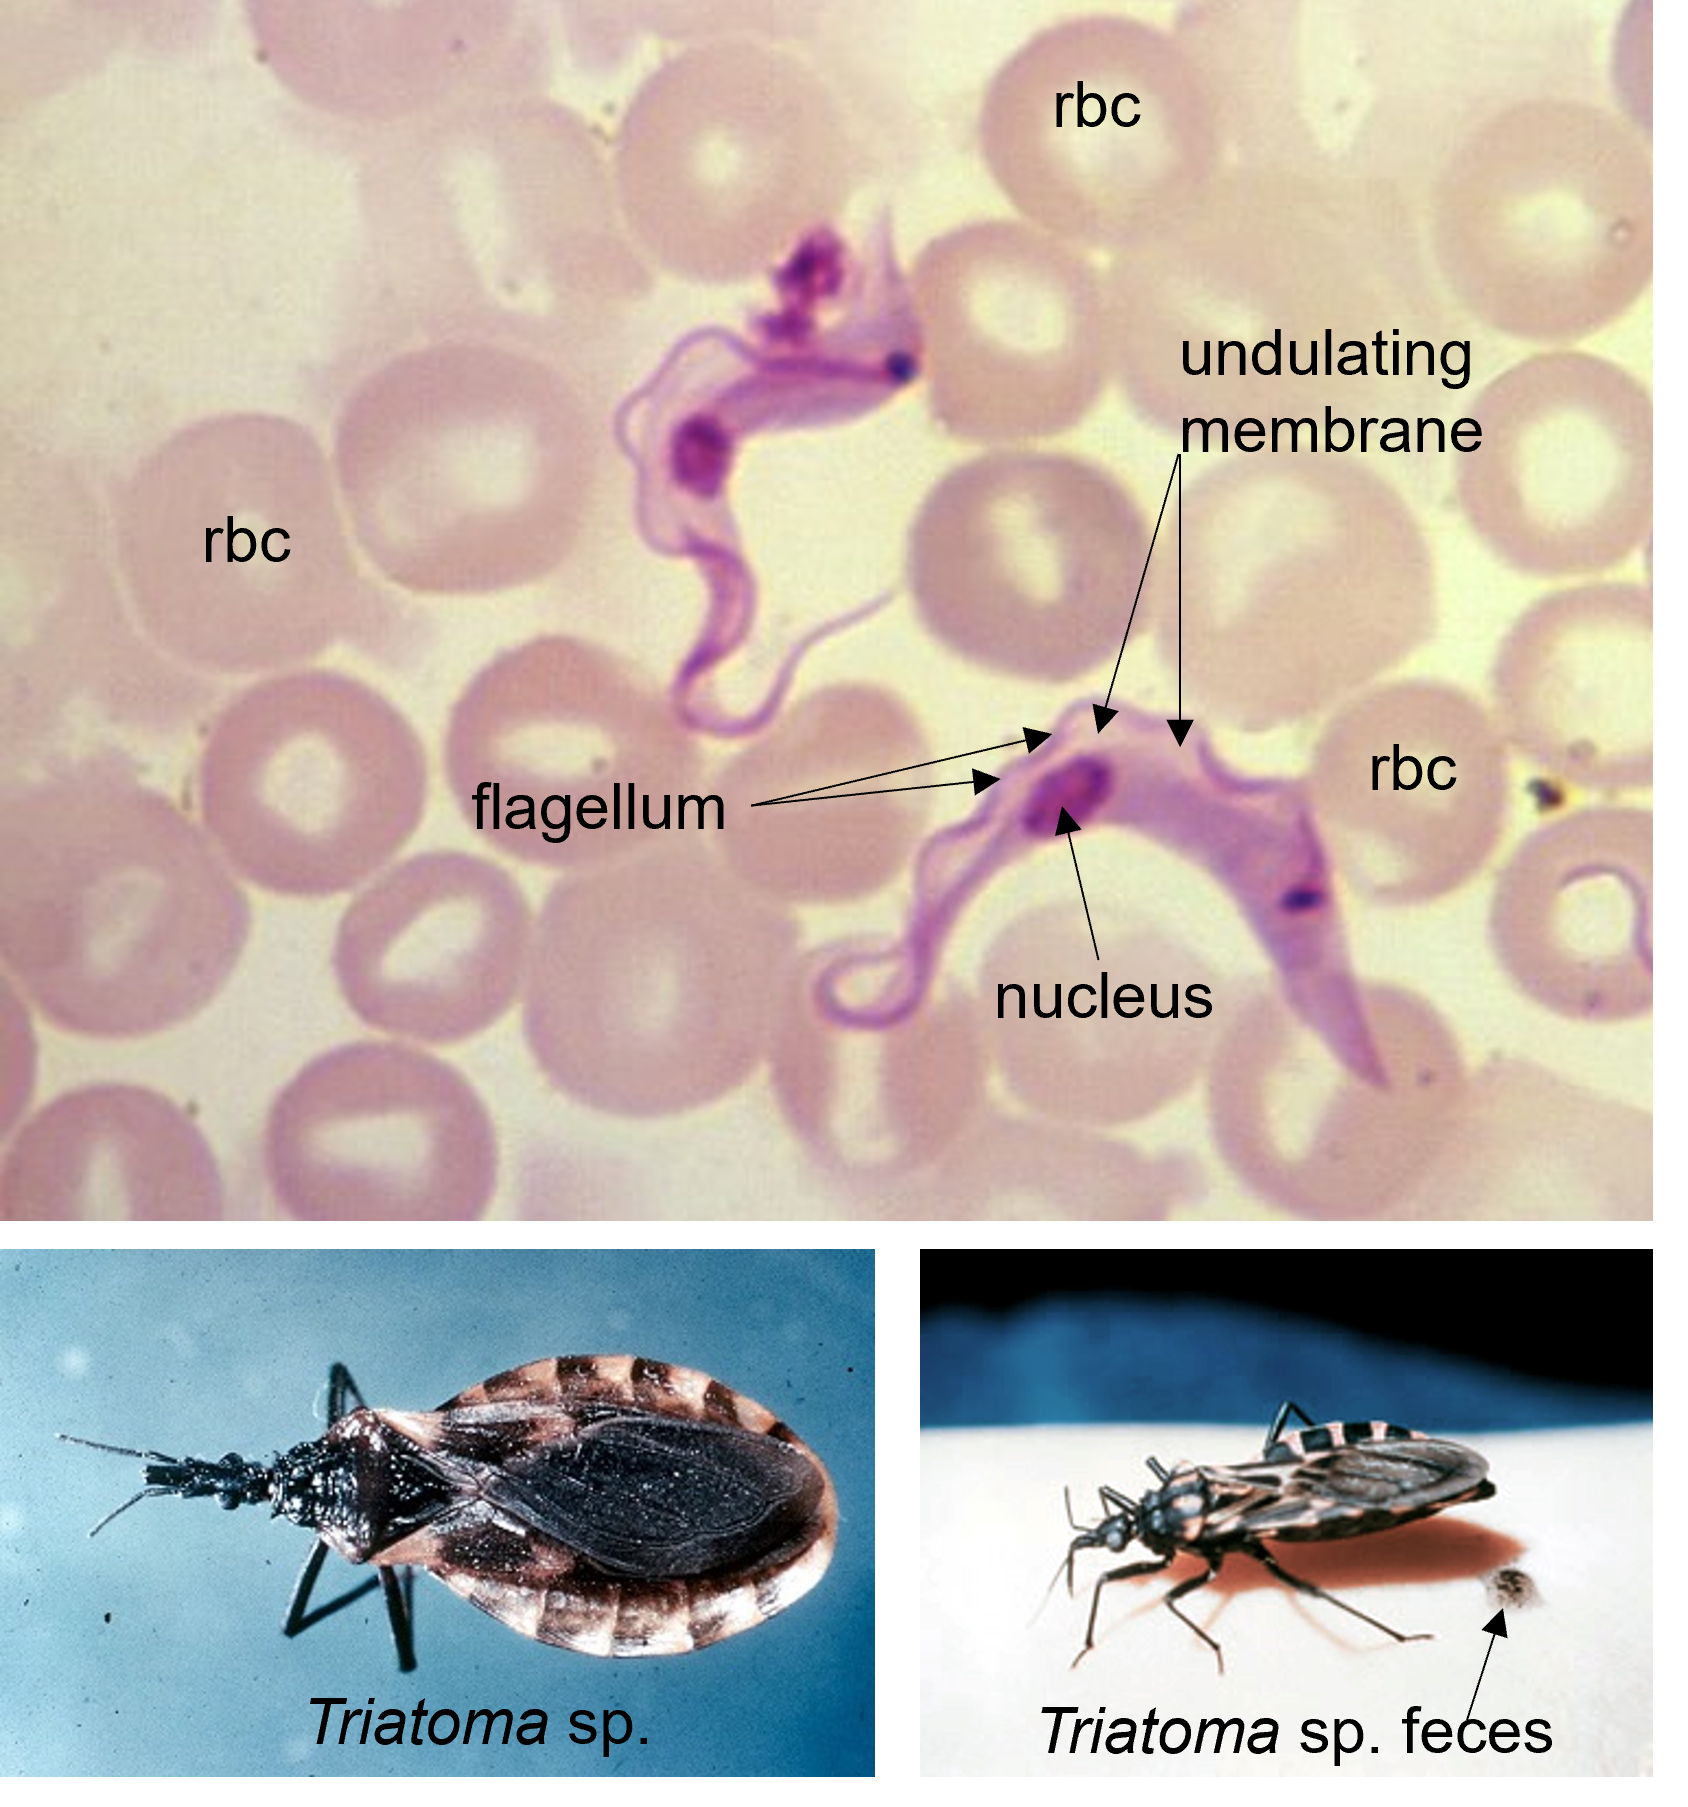 Trypanosoma structure in microscopic image living between human red blood cells; Triatoma bugs that transmit Trypanosoma